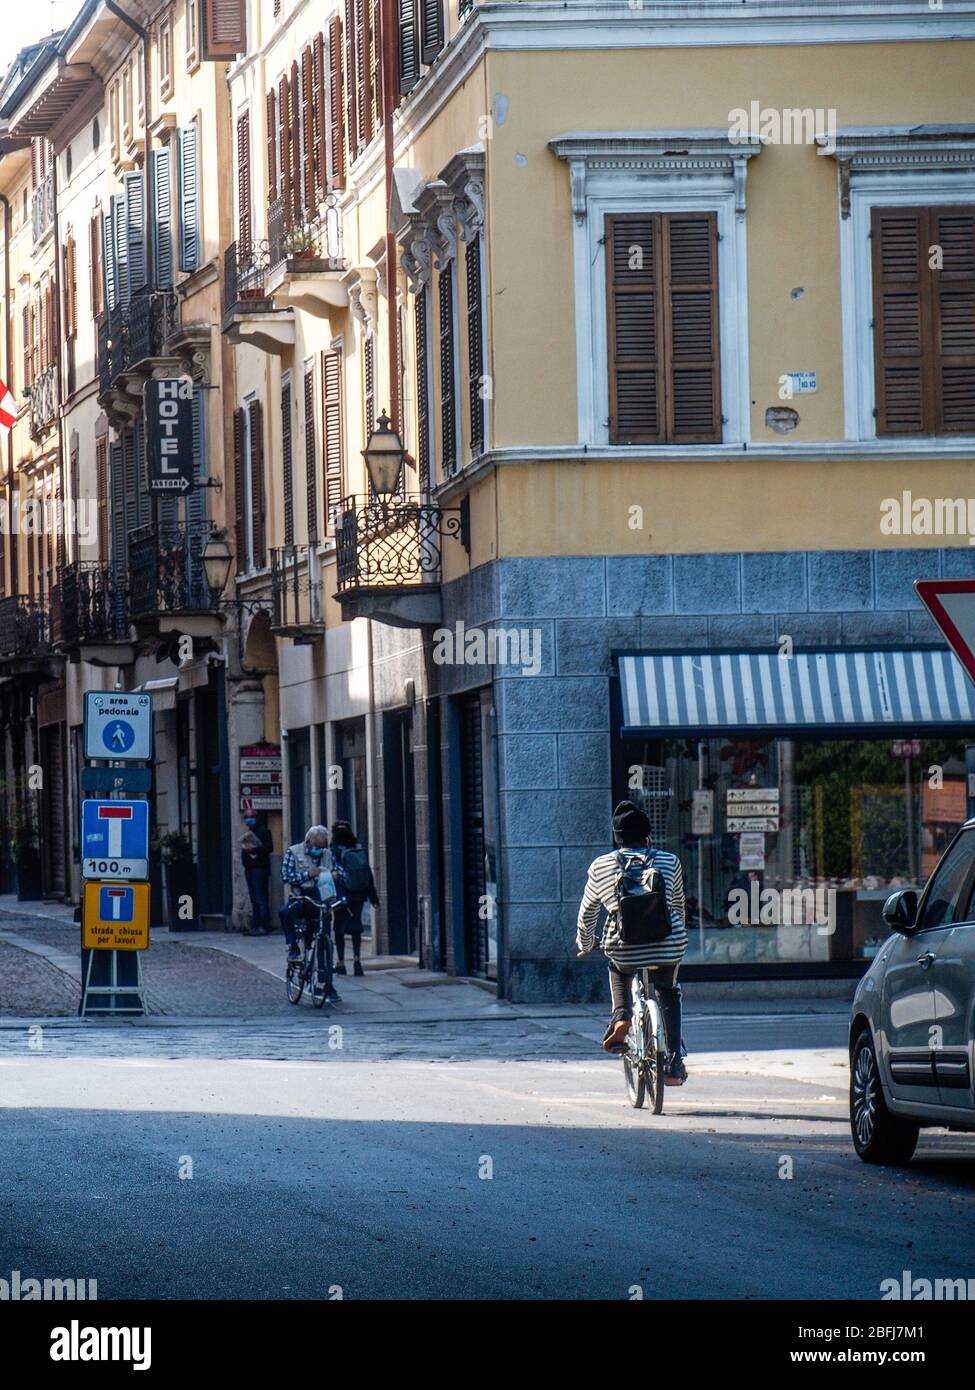 Cremona, Lombardy, Italy - April 19th 2020 - walking, dog walk, everyday life during covid-19 lockdown outbreak Stock Photo